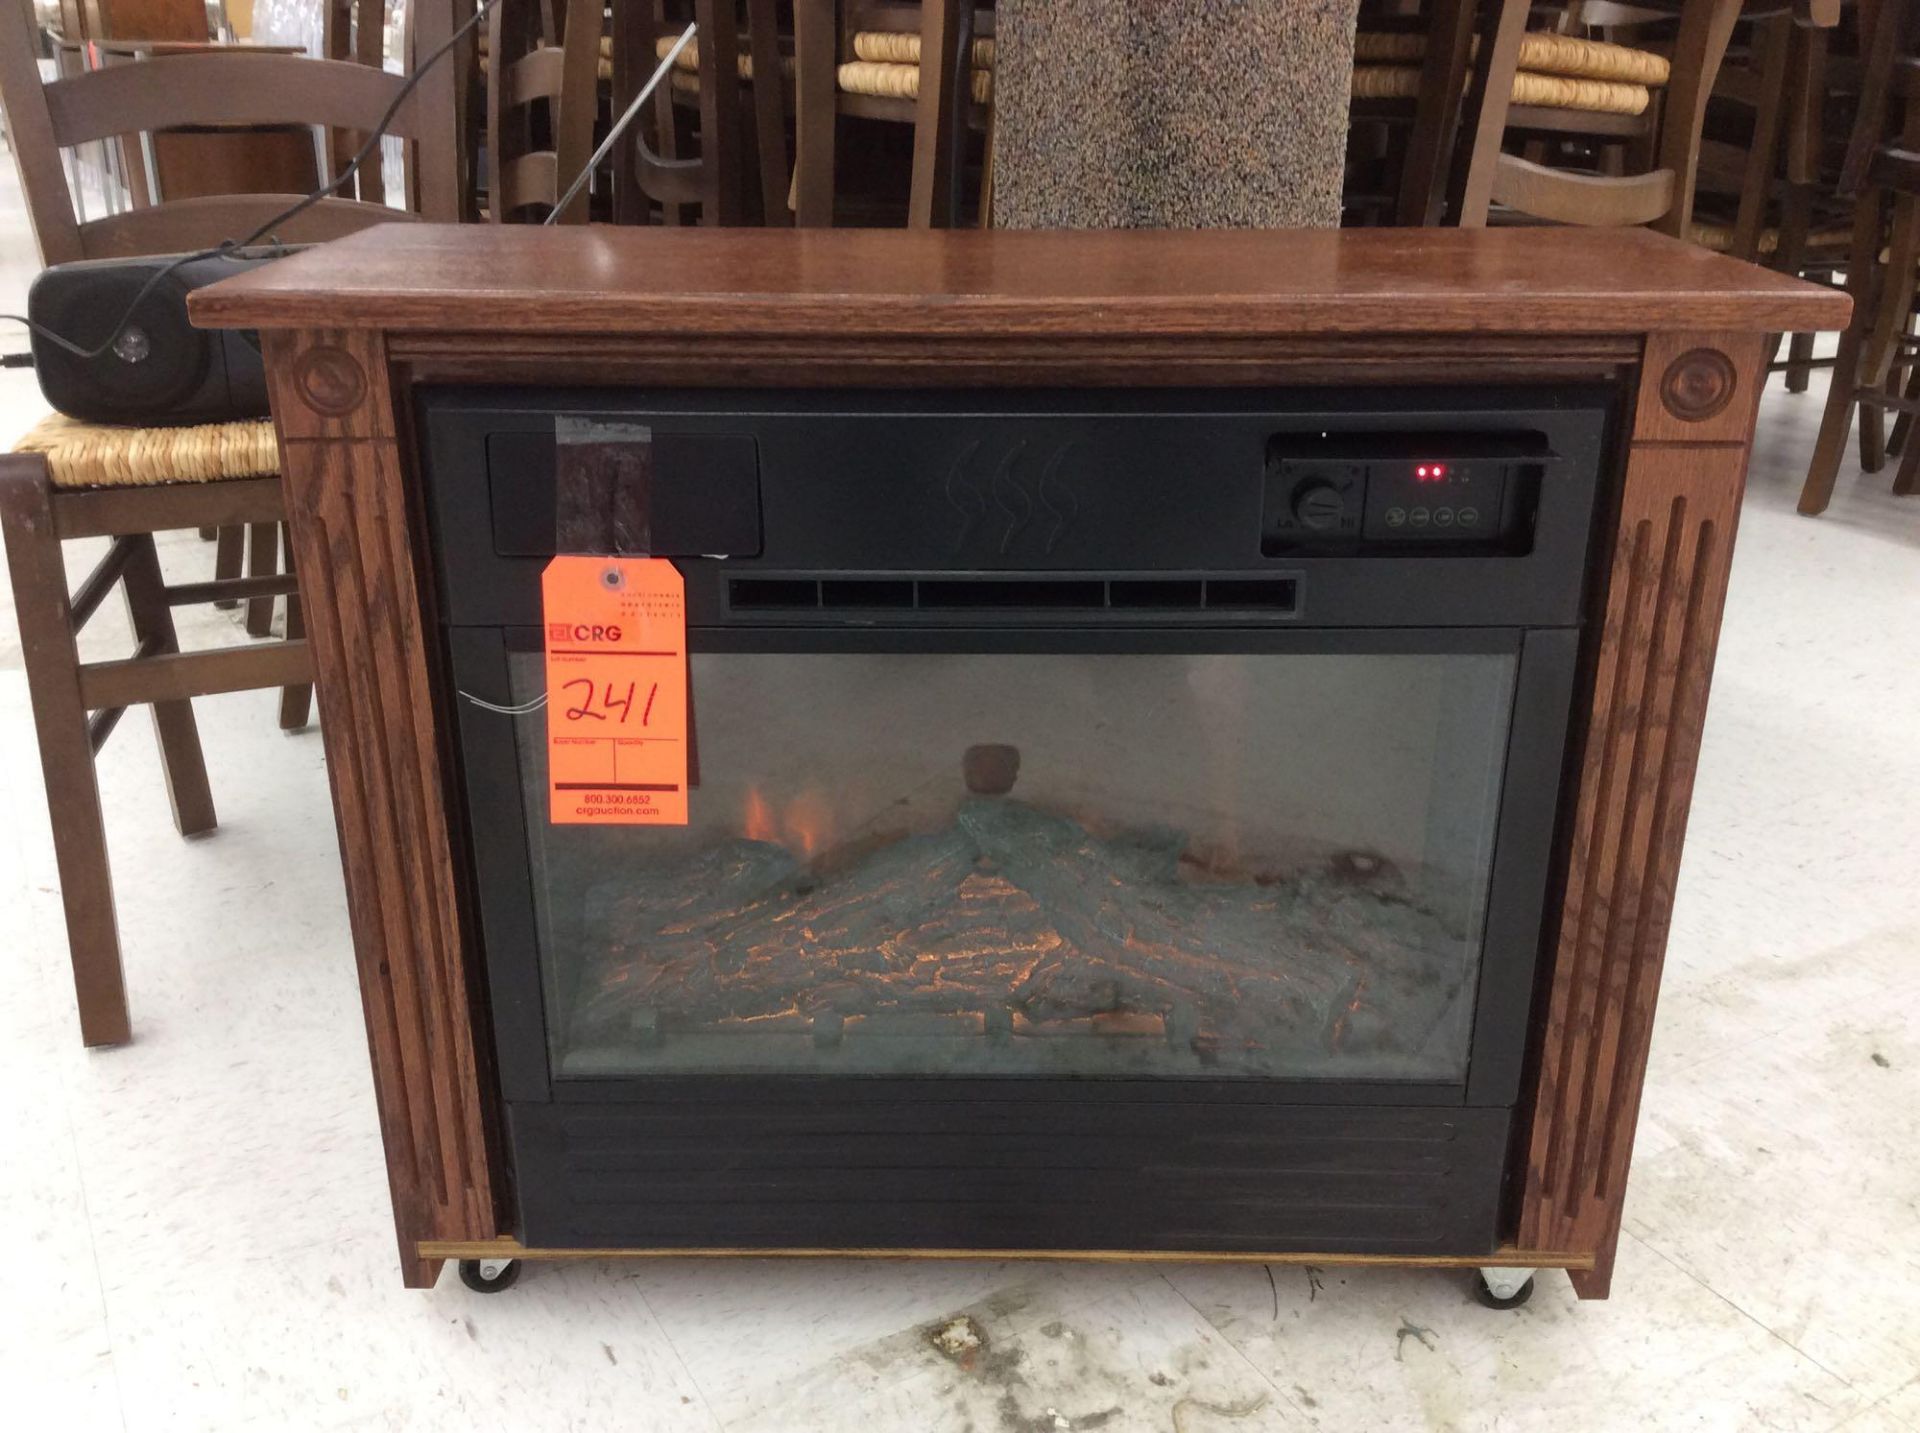 Portable fireplace with built-in heater